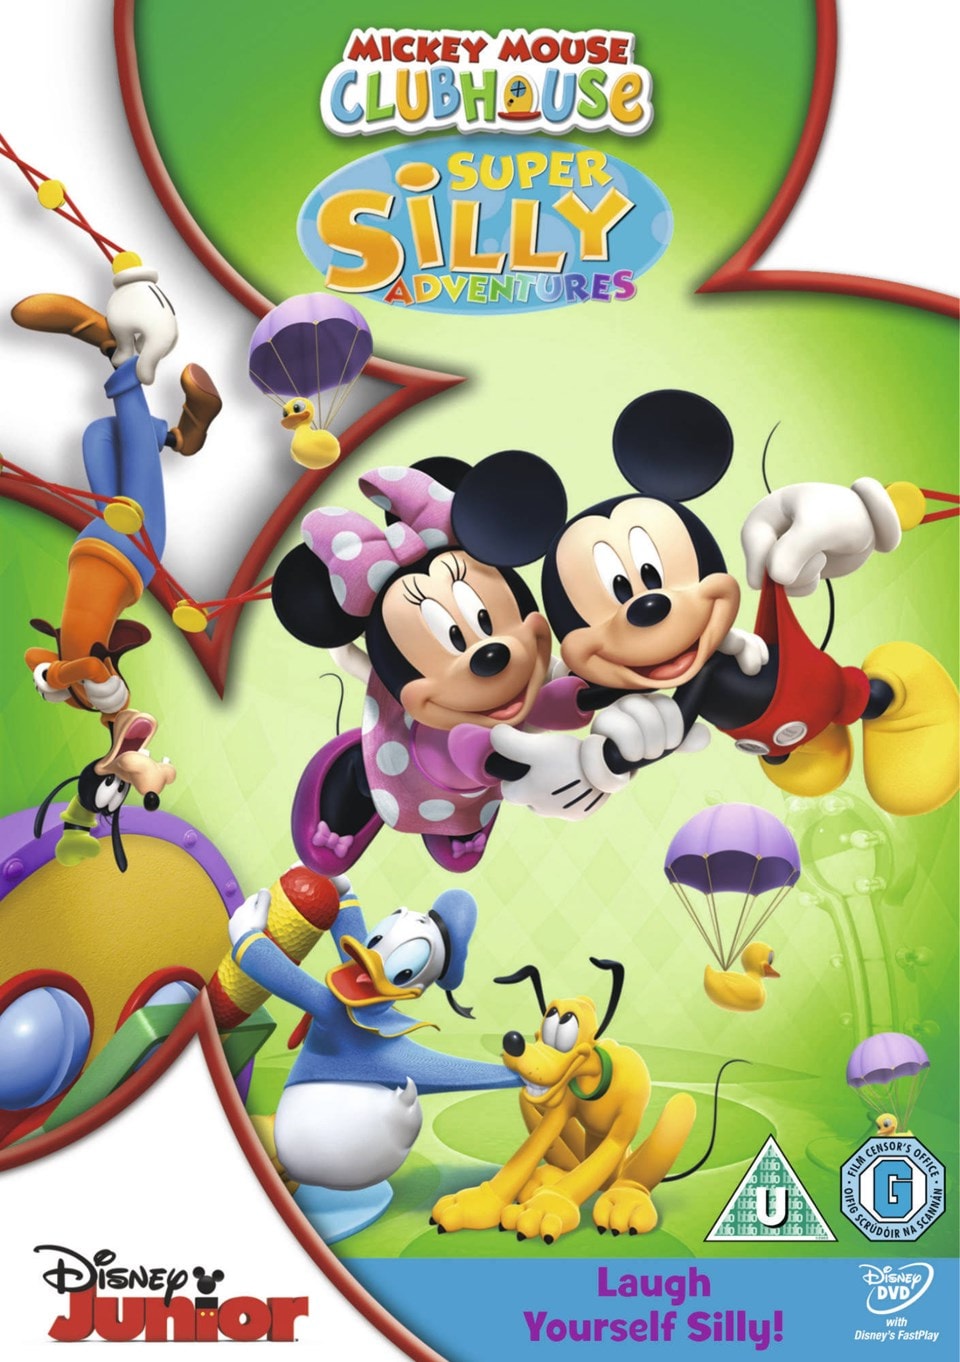 Mickey Mouse Clubhouse: Super Silly Adventures | DVD | Free shipping ...